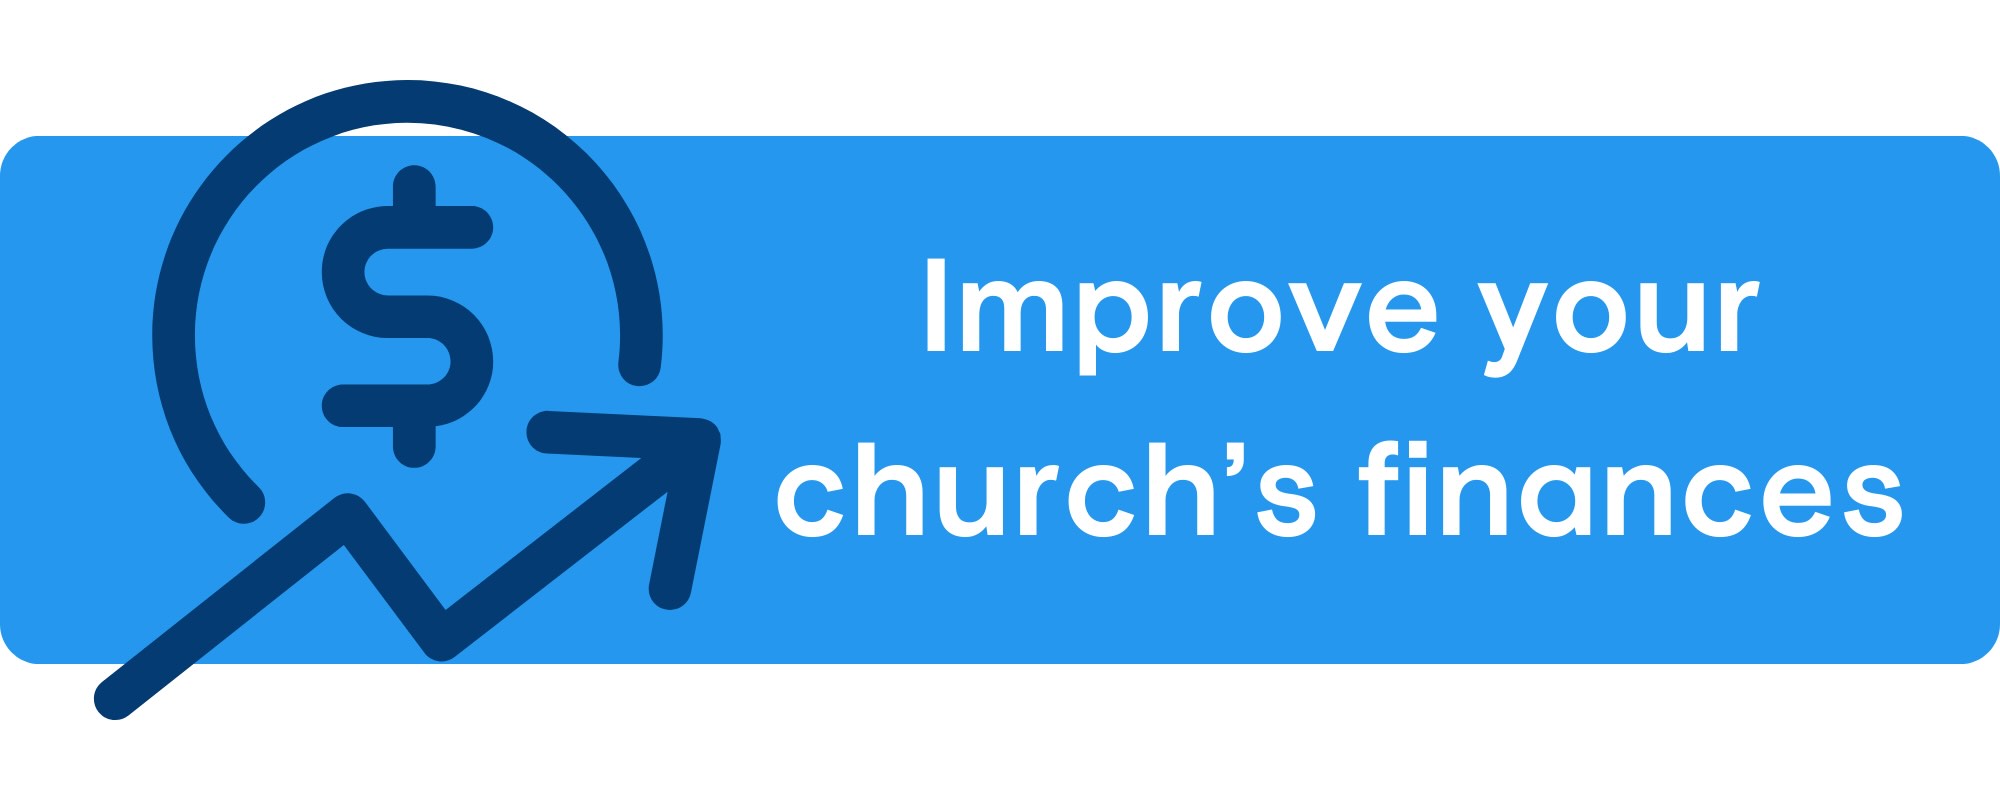 Simplify your church finances to improve the financial health of your church